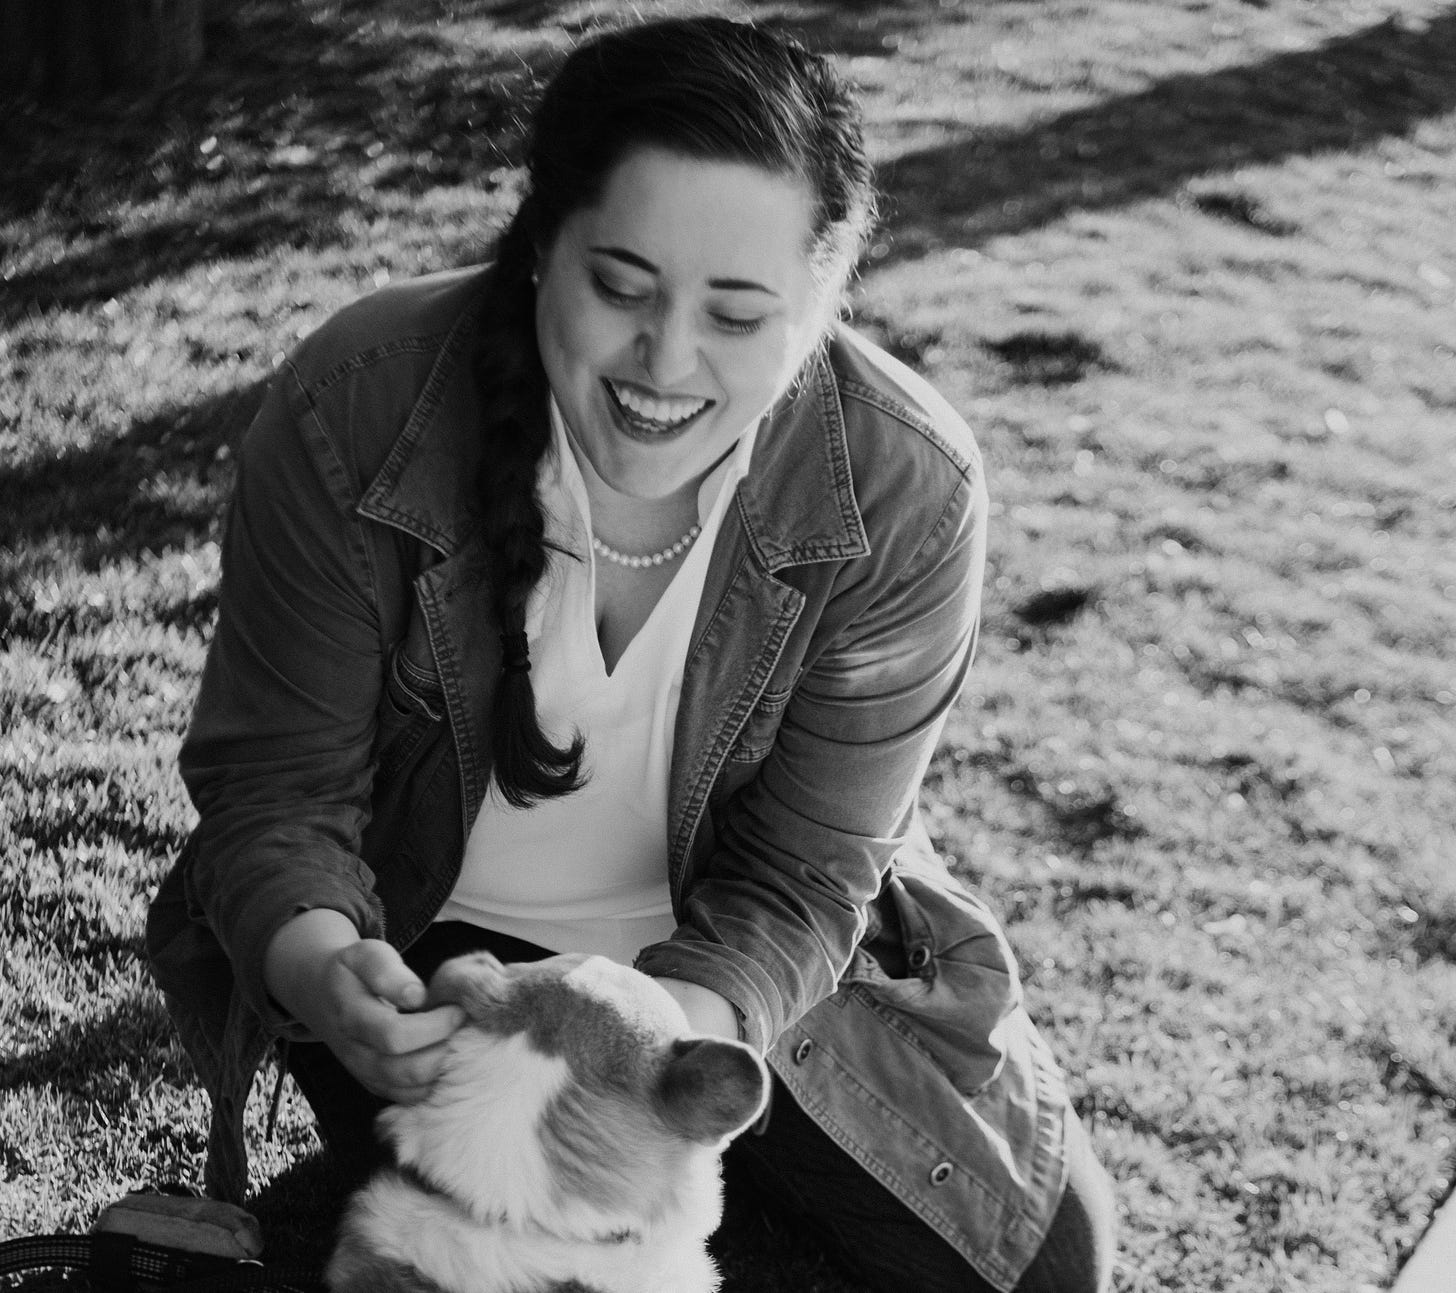 Black and white photo of woman smiling and petting a dog.